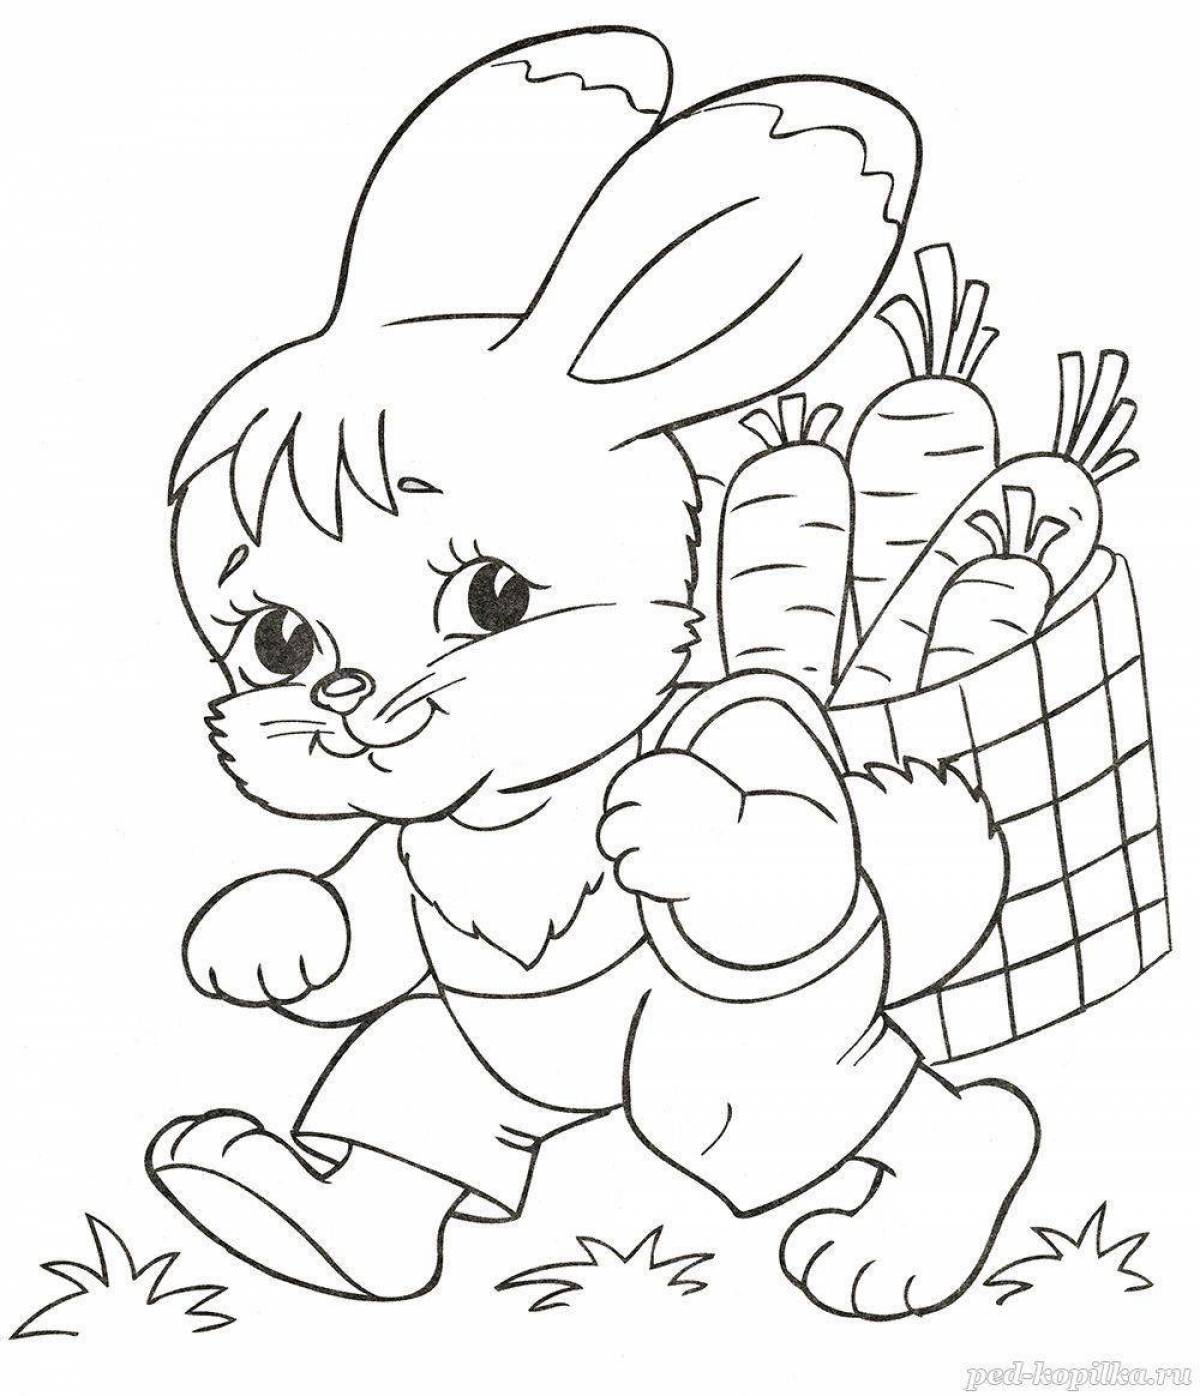 Amazing rabbit coloring book for kids 3-4 years old